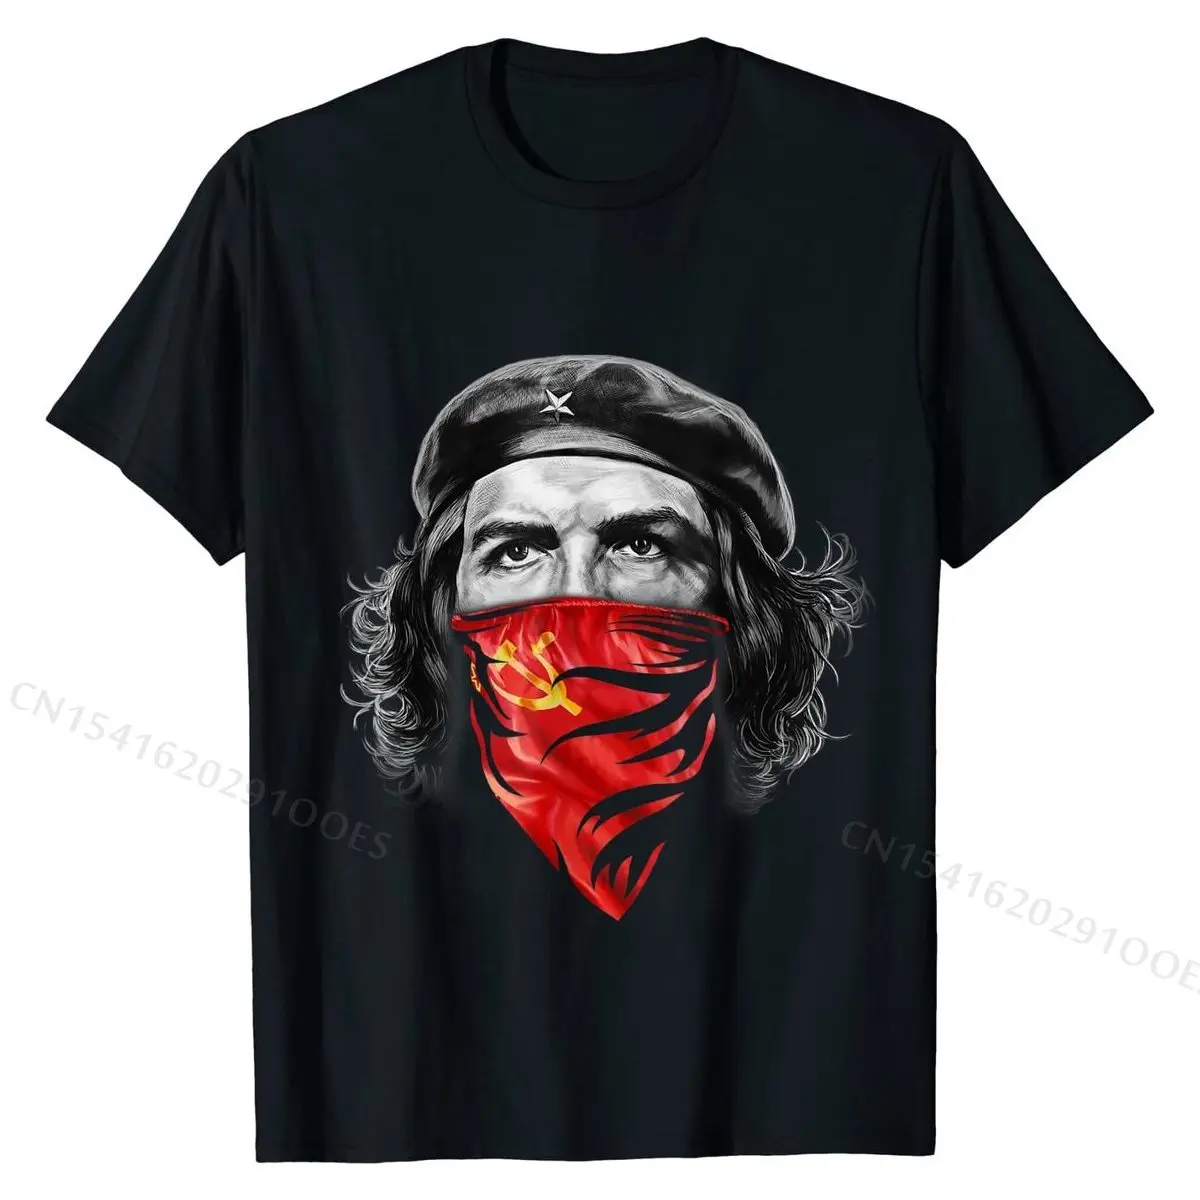 T-Shirt, Che Guevara w Soviet Hammer and Sickle Red Bandana Cotton T Shirt for Men Crazy Tops Tees On Sale Funny